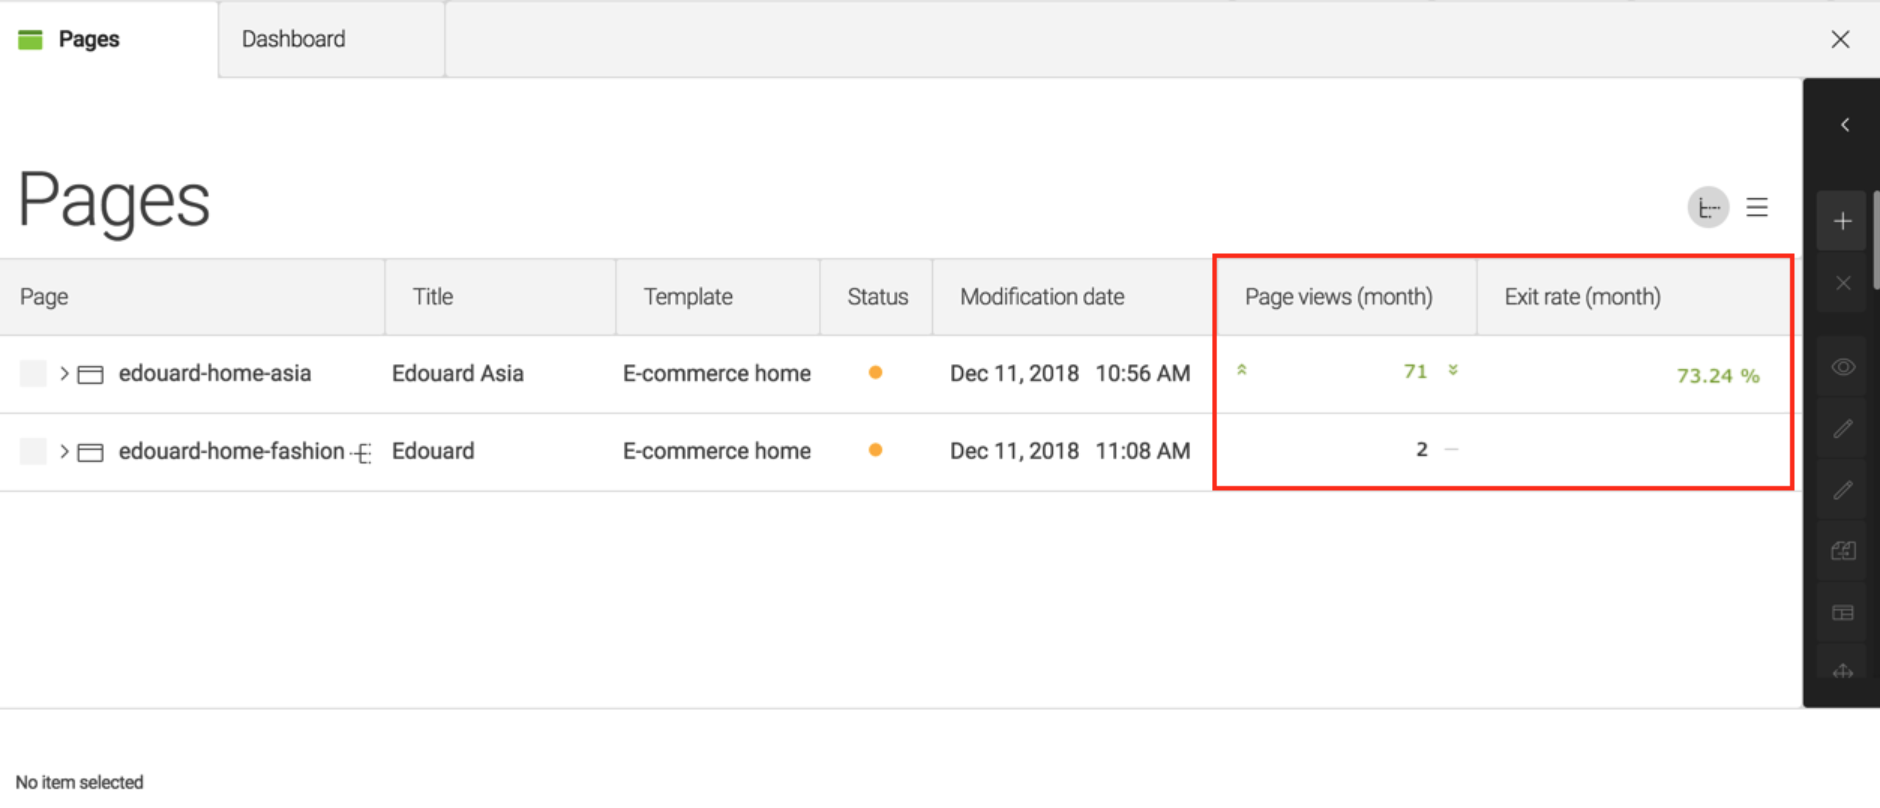 Page views and Exit rate values shown in Pages app